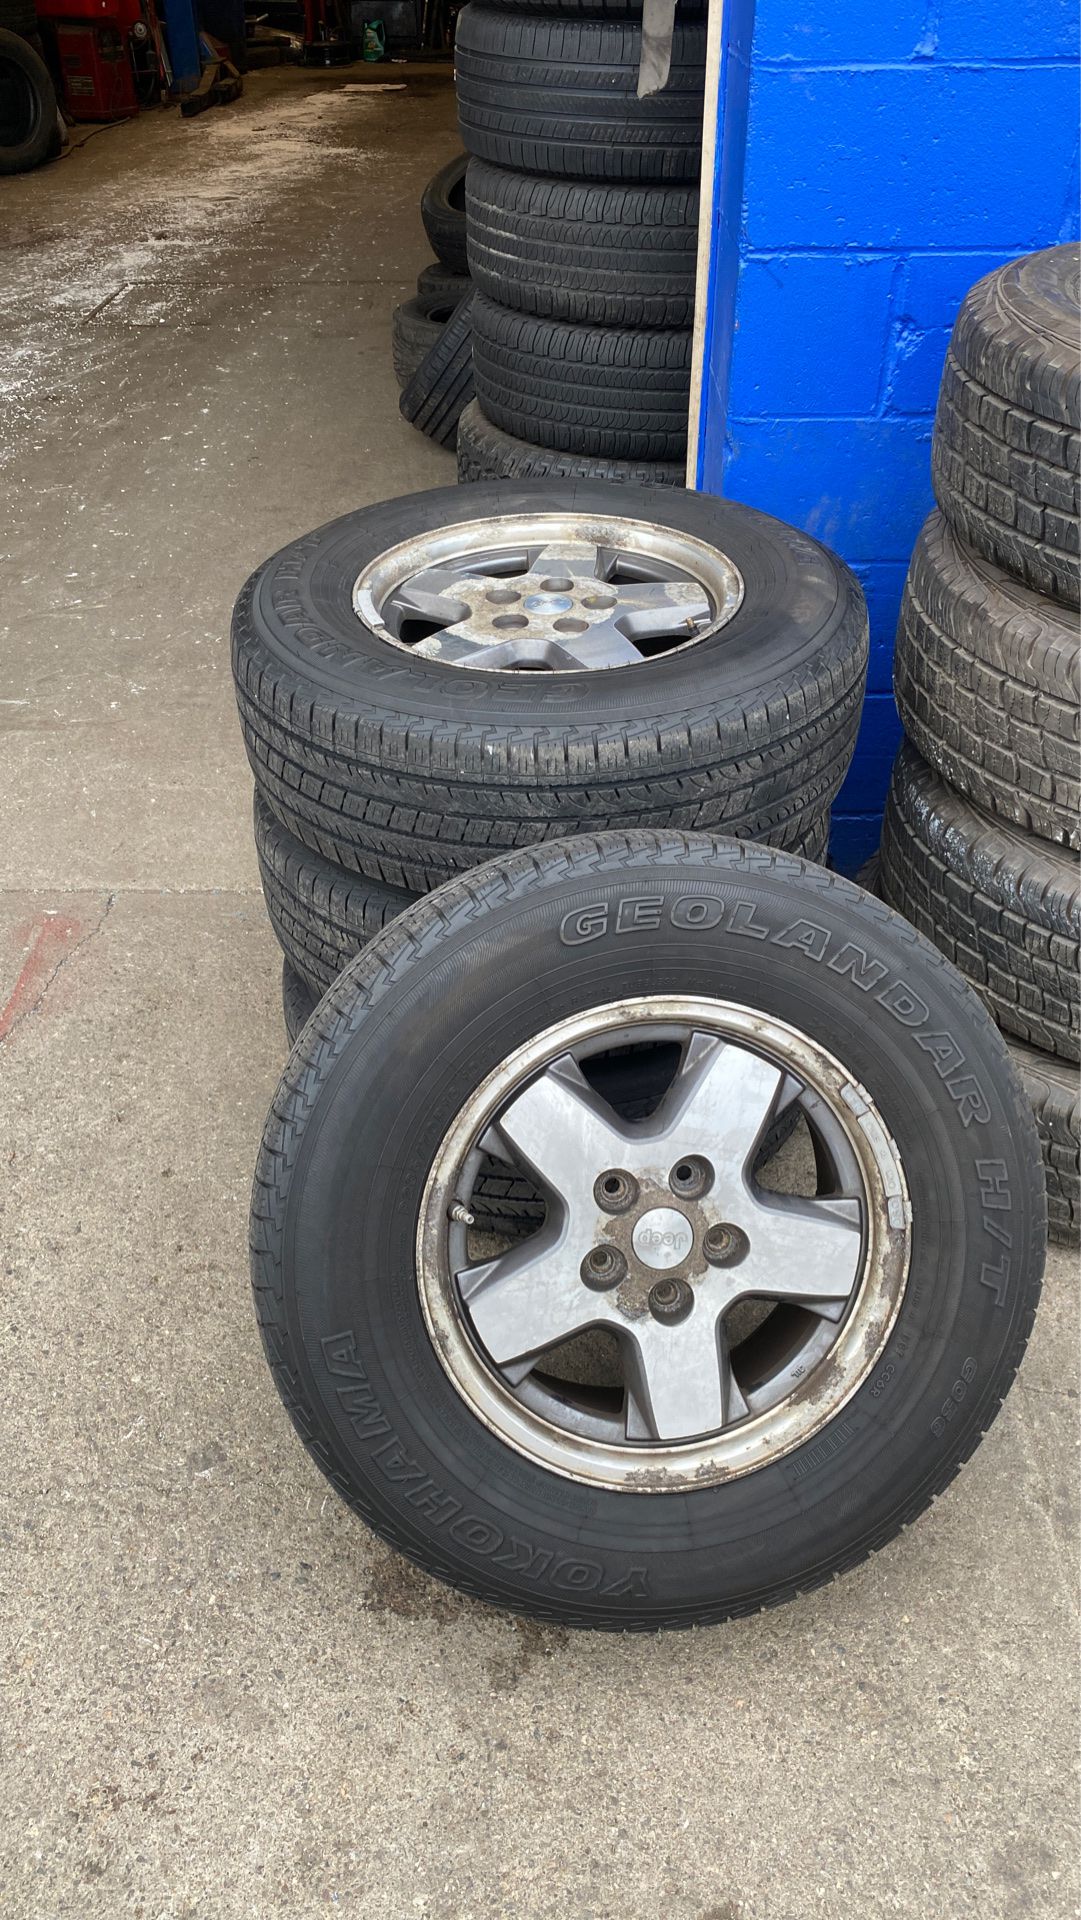 Jeep Cherokee rims with good tires 235-70-16 size